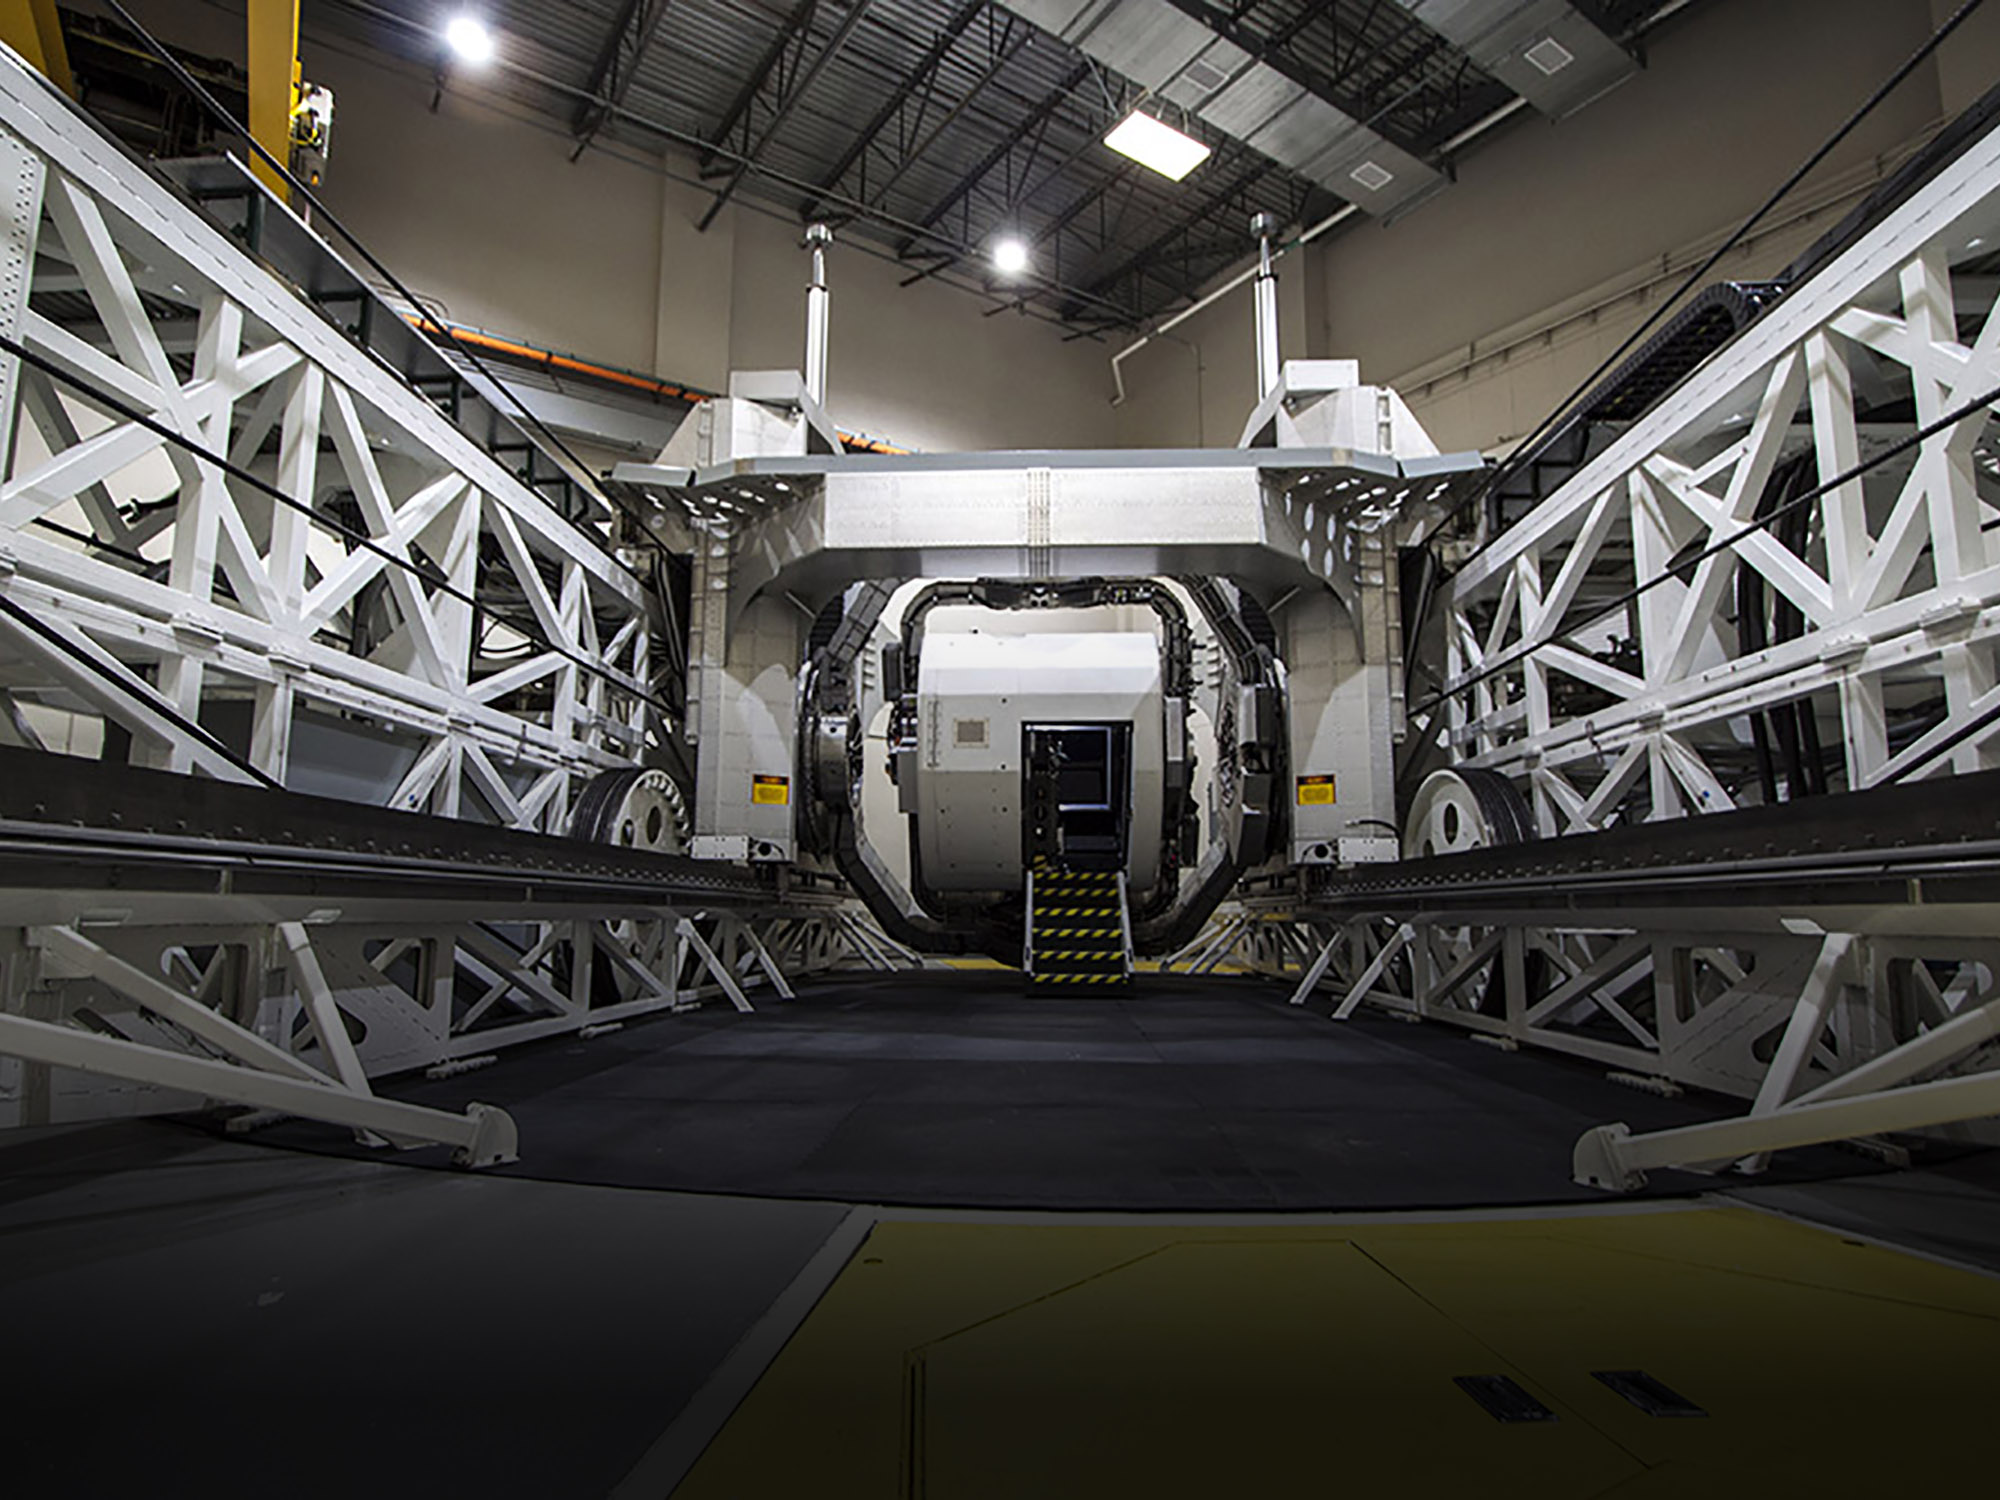 KRAKEN Advanced Spatial Disorientation Trainer at Wright-Patterson Air Force Base